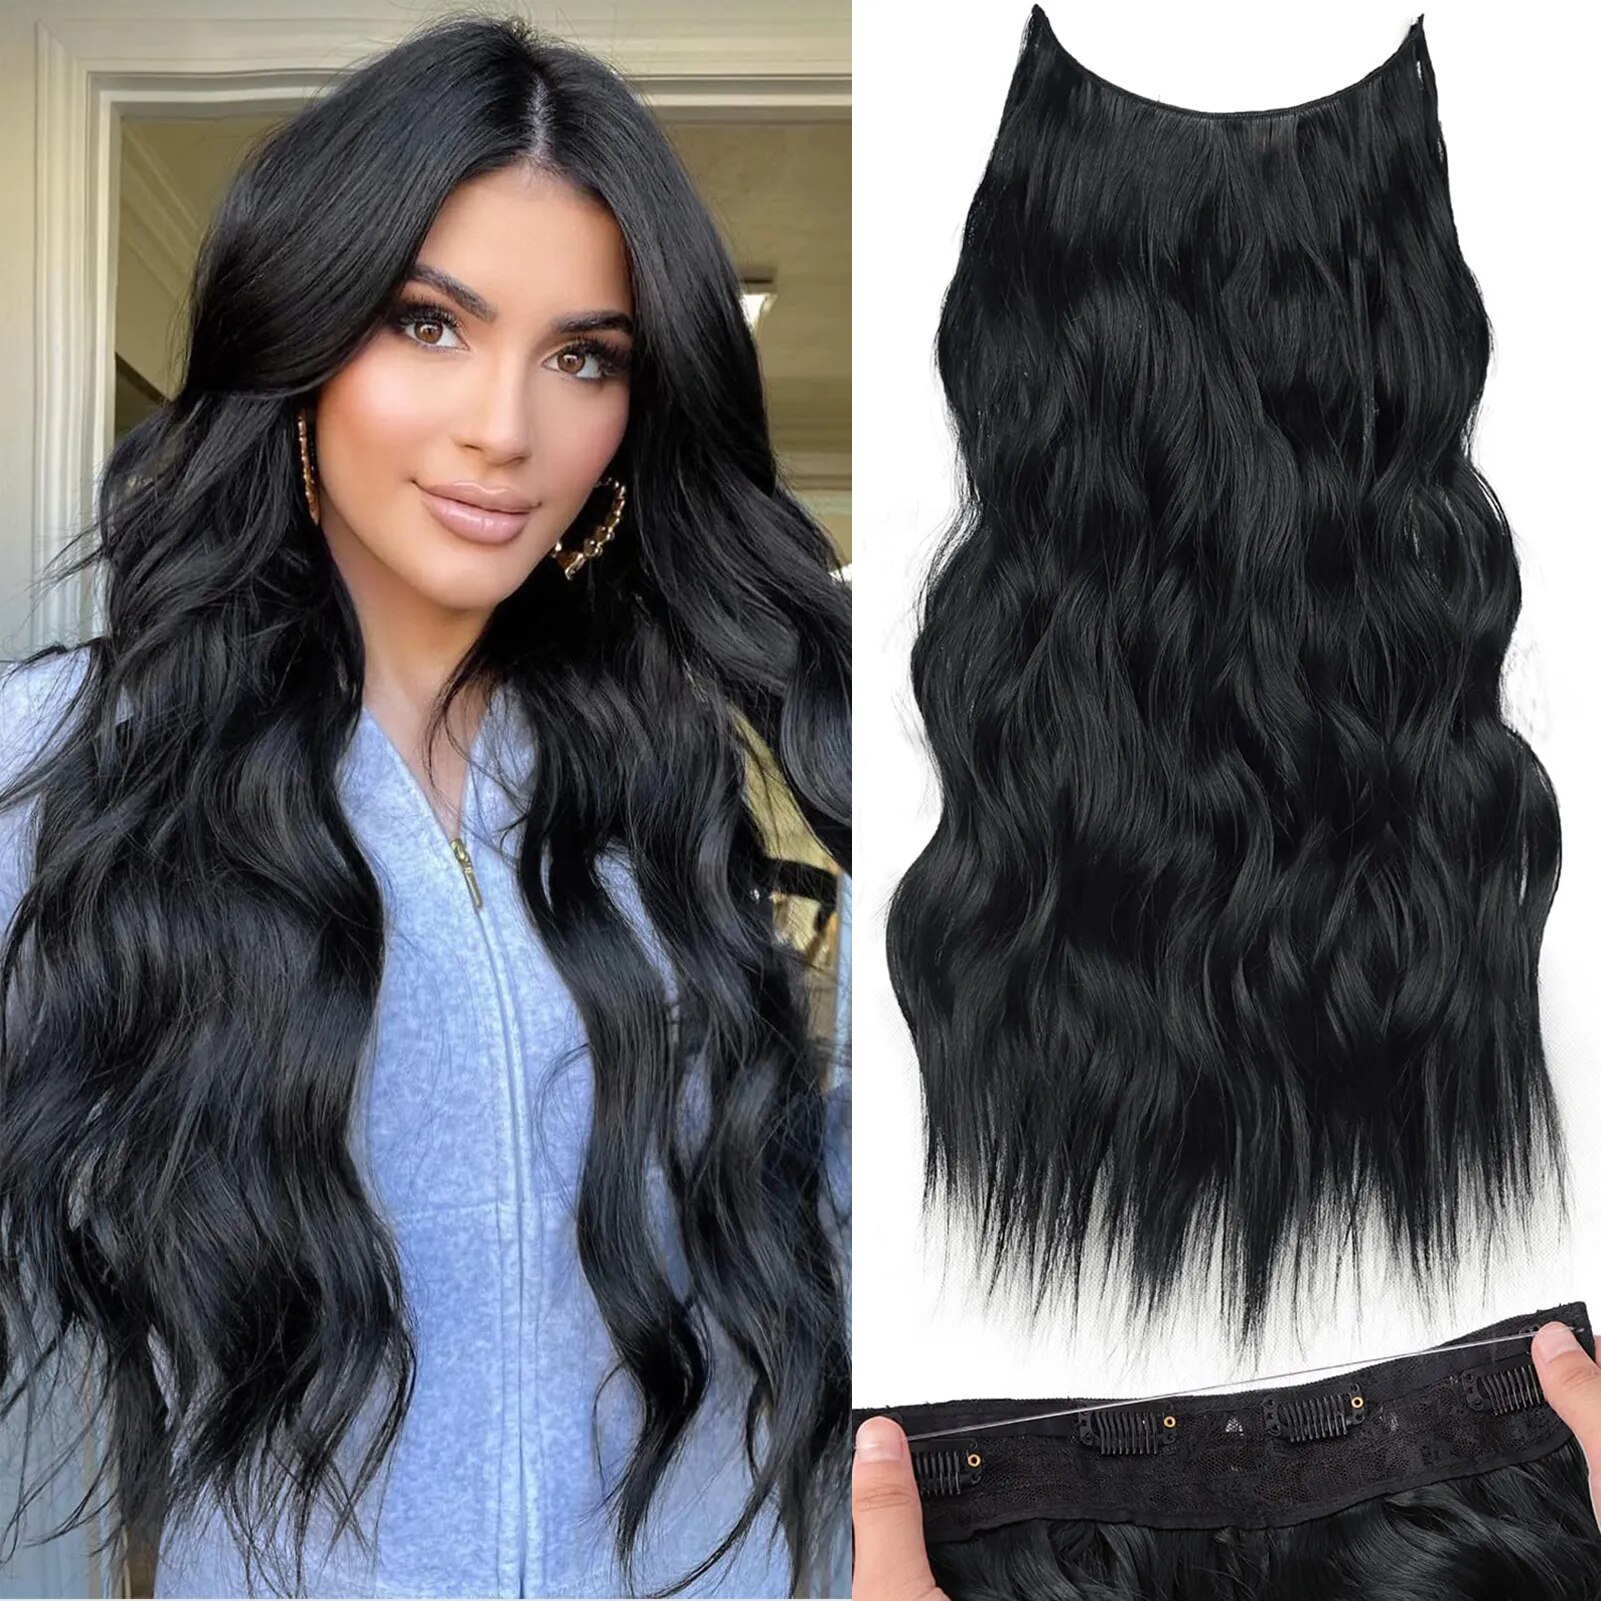 Synthetic Invisible Wire Hair Extensions 22Inch Long Wavy 4 Clips In Hairpiece For Women Brown Natural Black Daily Party Use